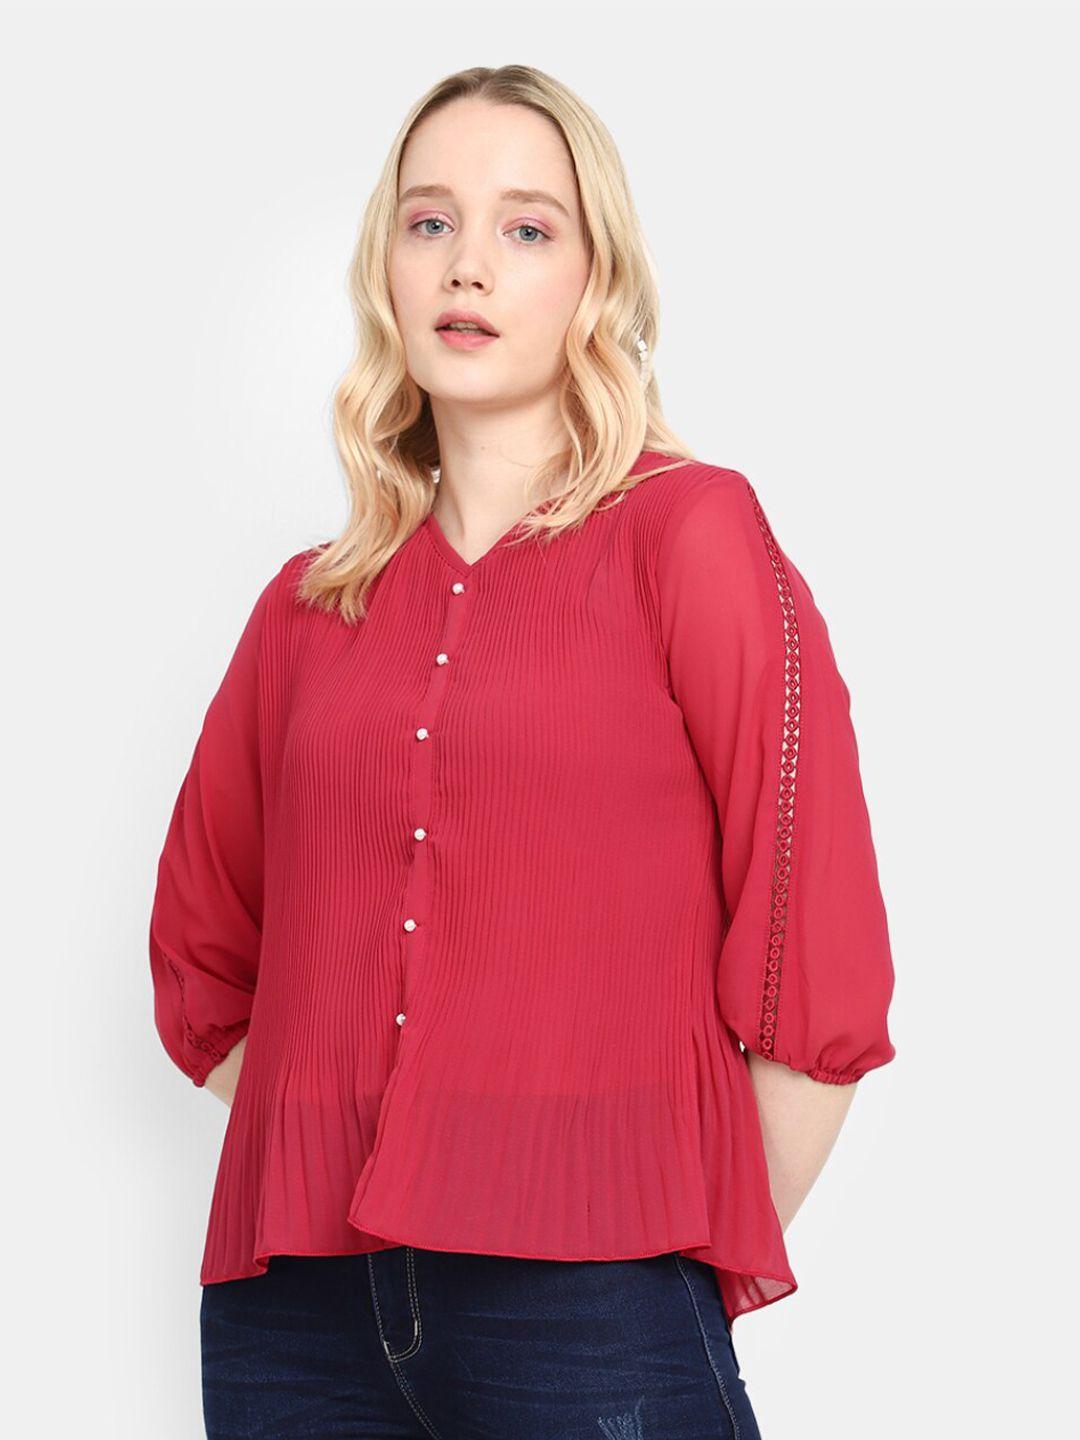 v-mart accordion pleats v neck puff sleeves georgette top